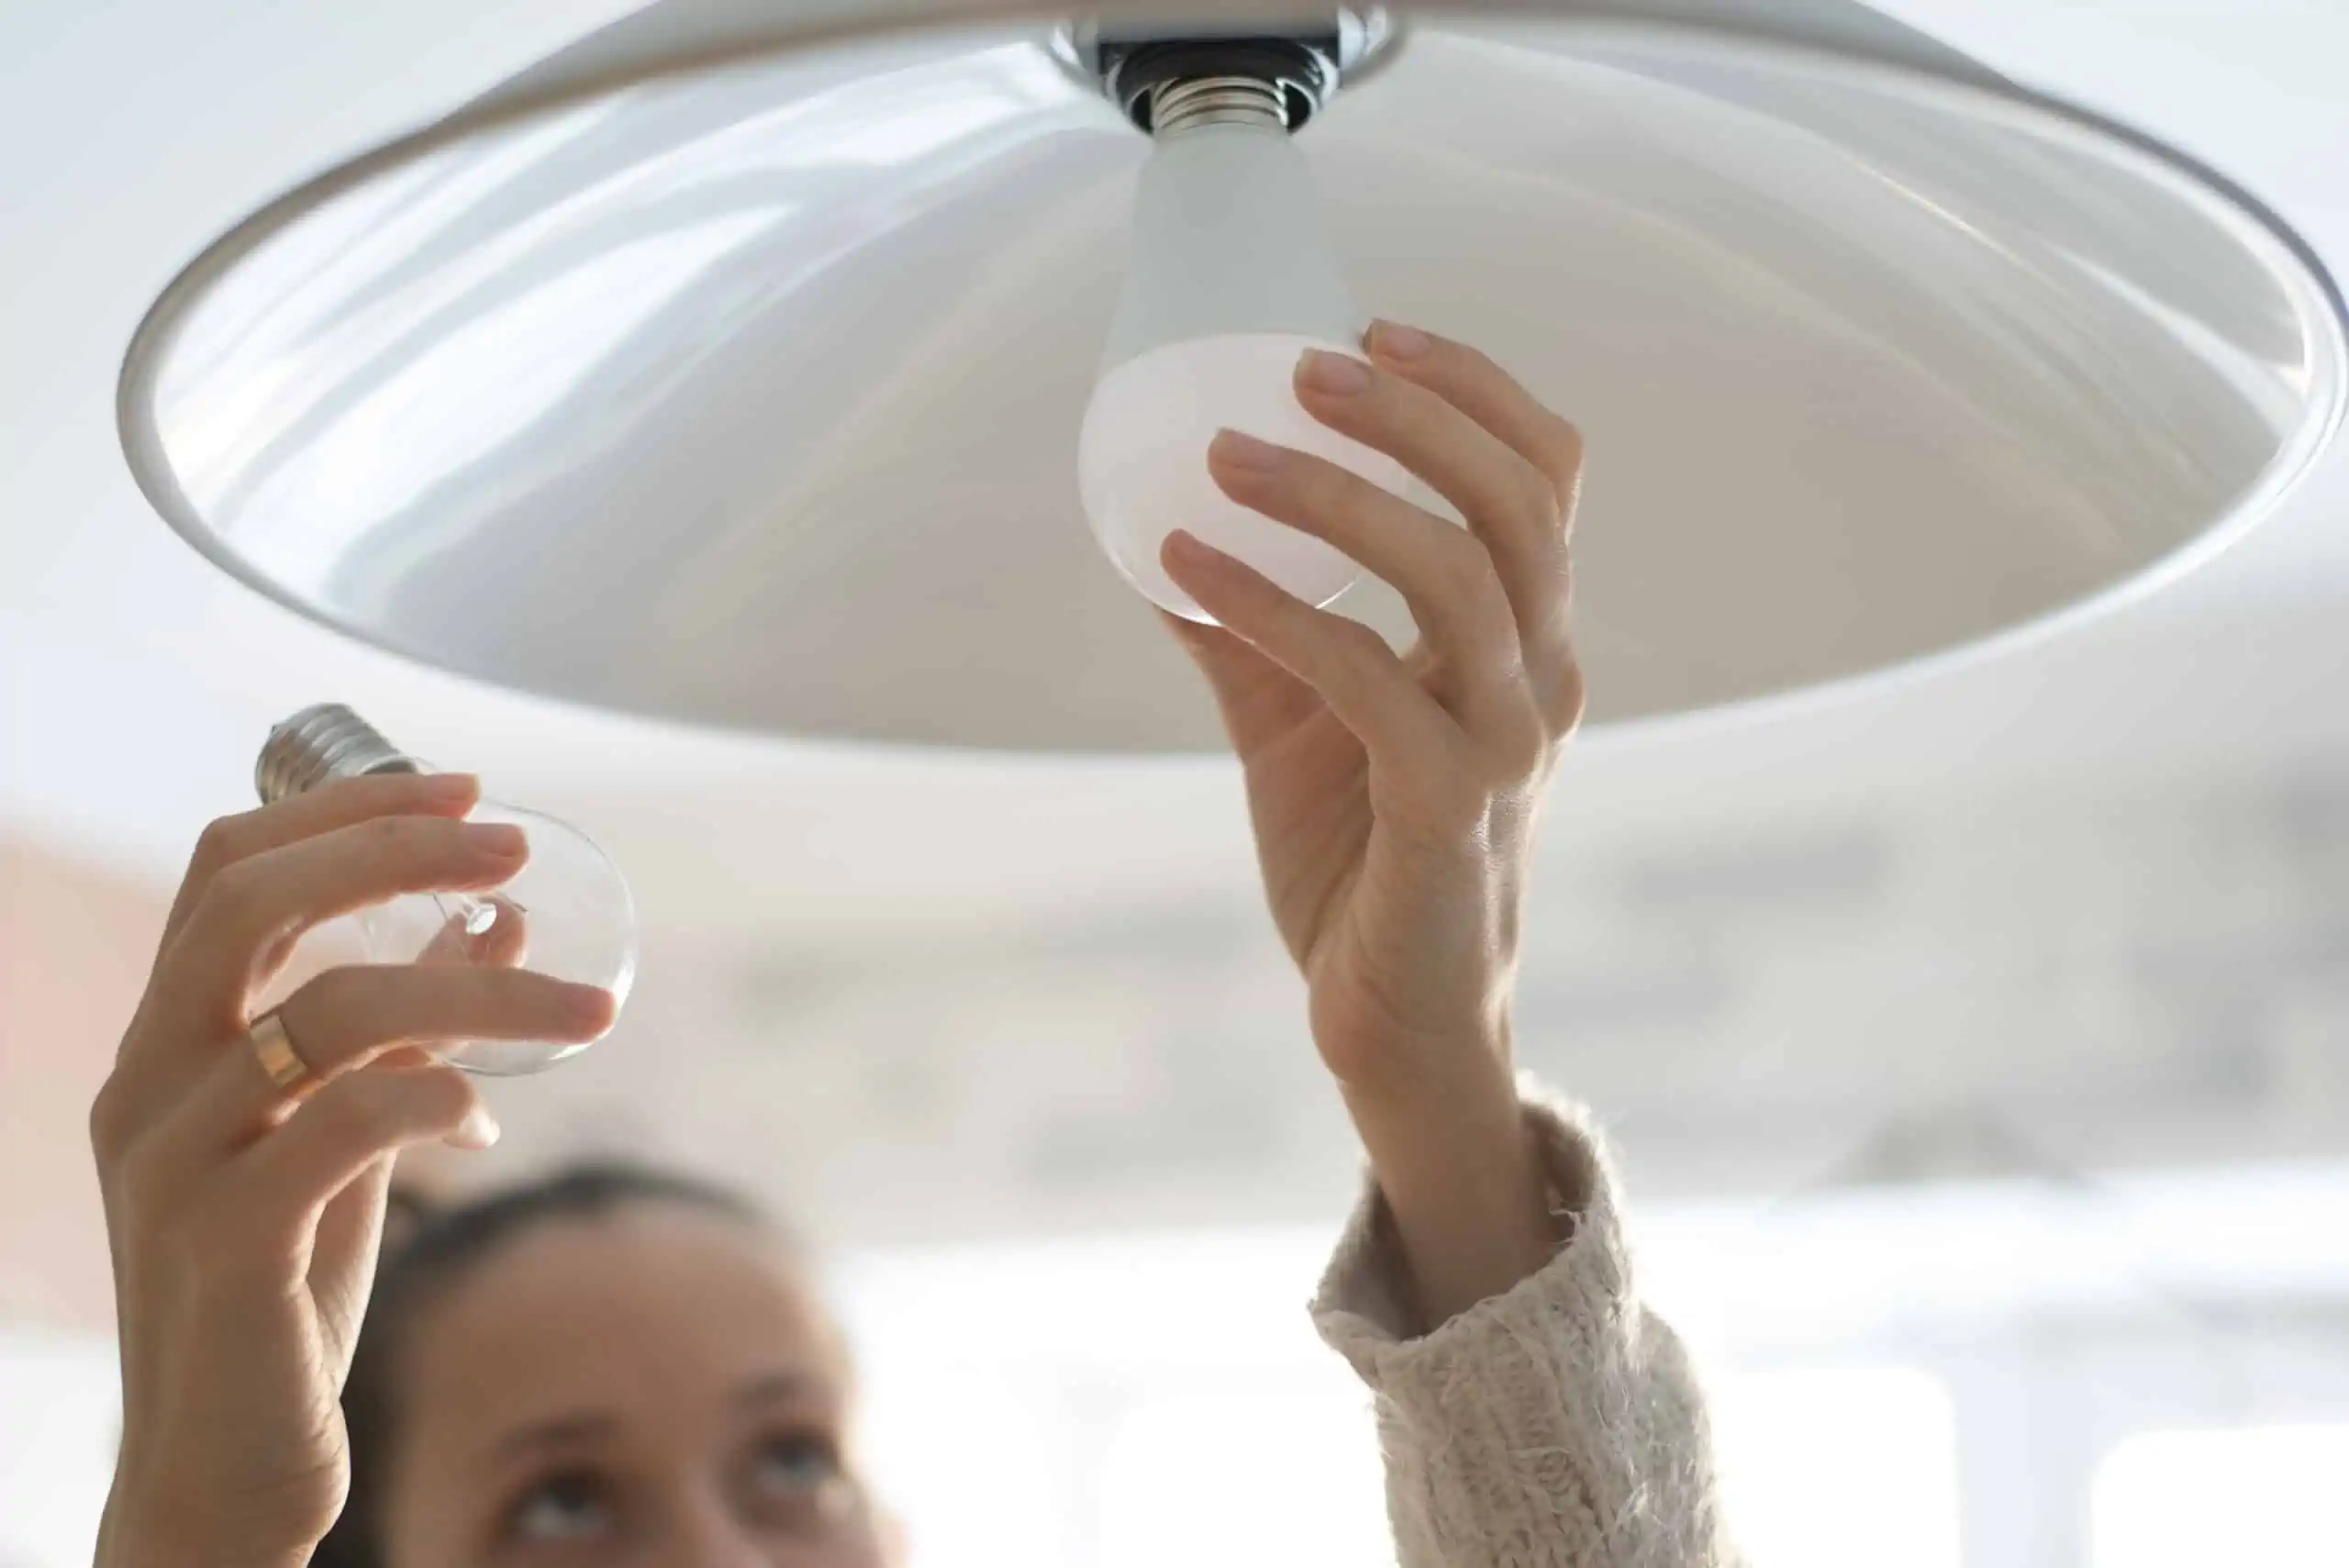 Woman replacing old incandescent light bulbs with LED light bulbs using less lighting energy and lowering utility bills